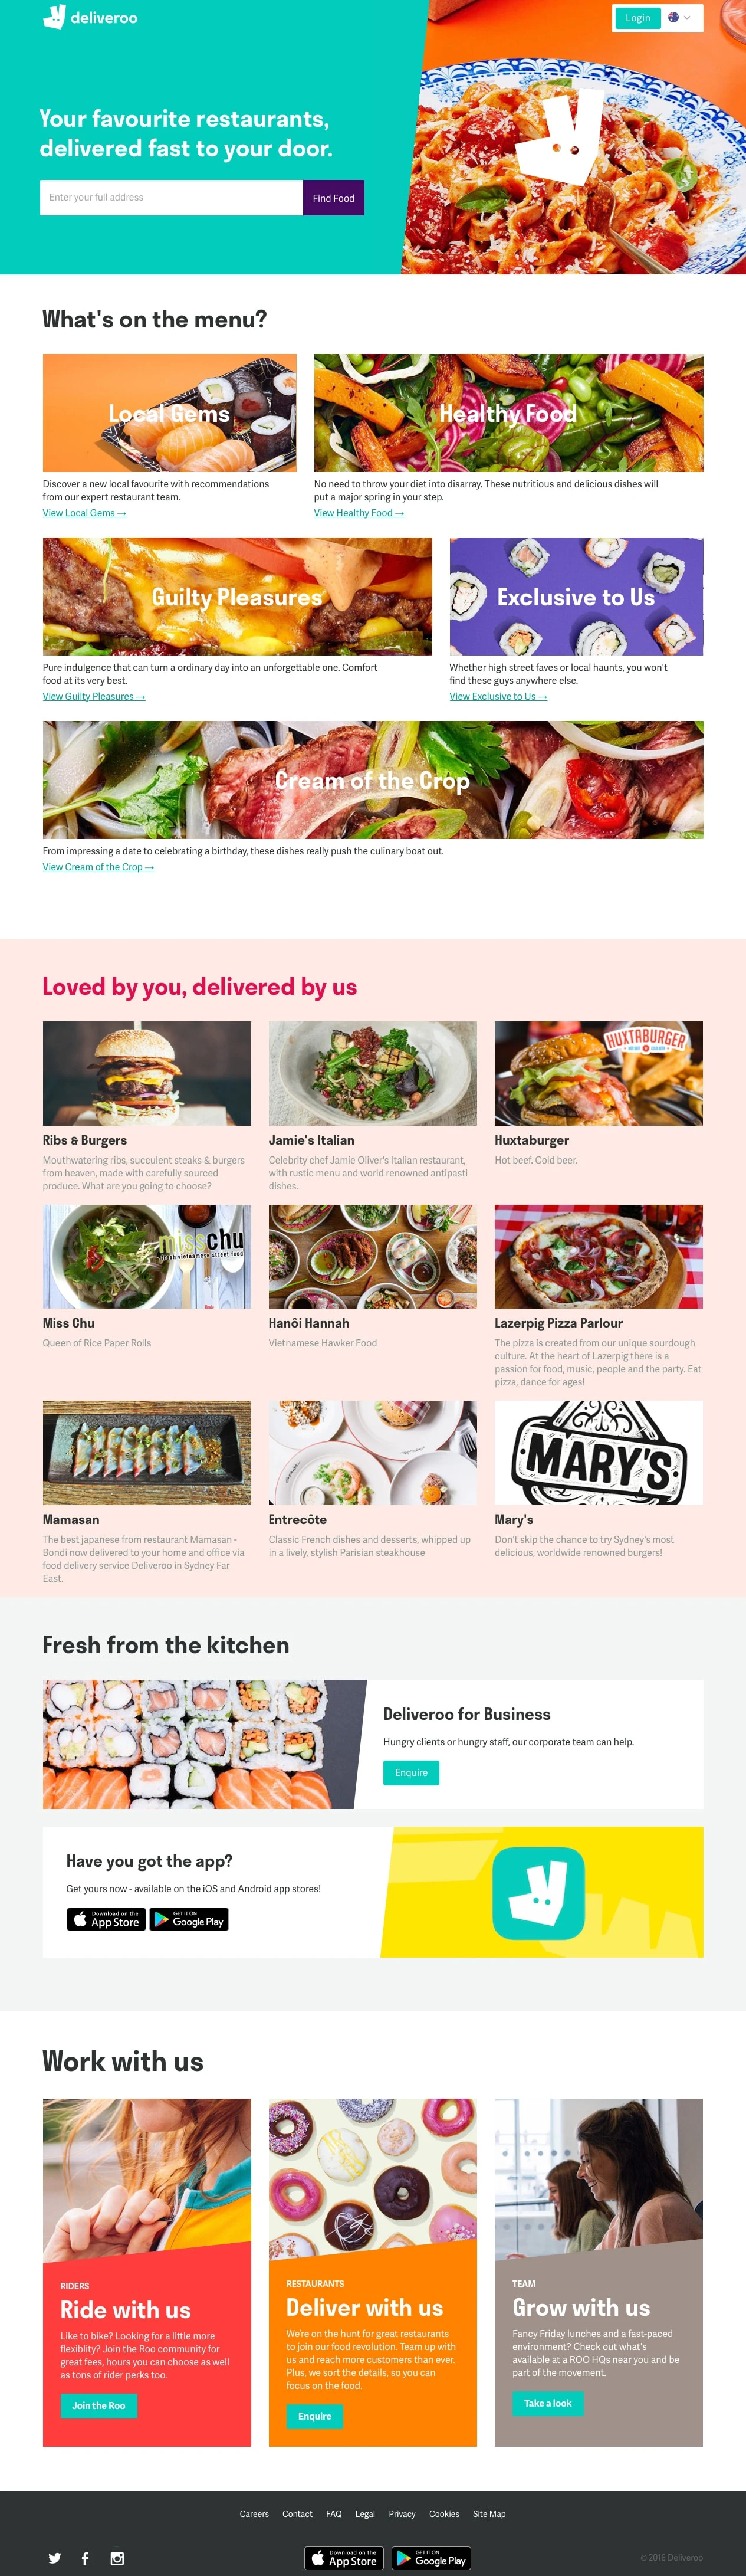 Deliveroo Landing Page Example: Order high-quality takeaway online from top Australian restaurants, fast delivery straight to your home or office